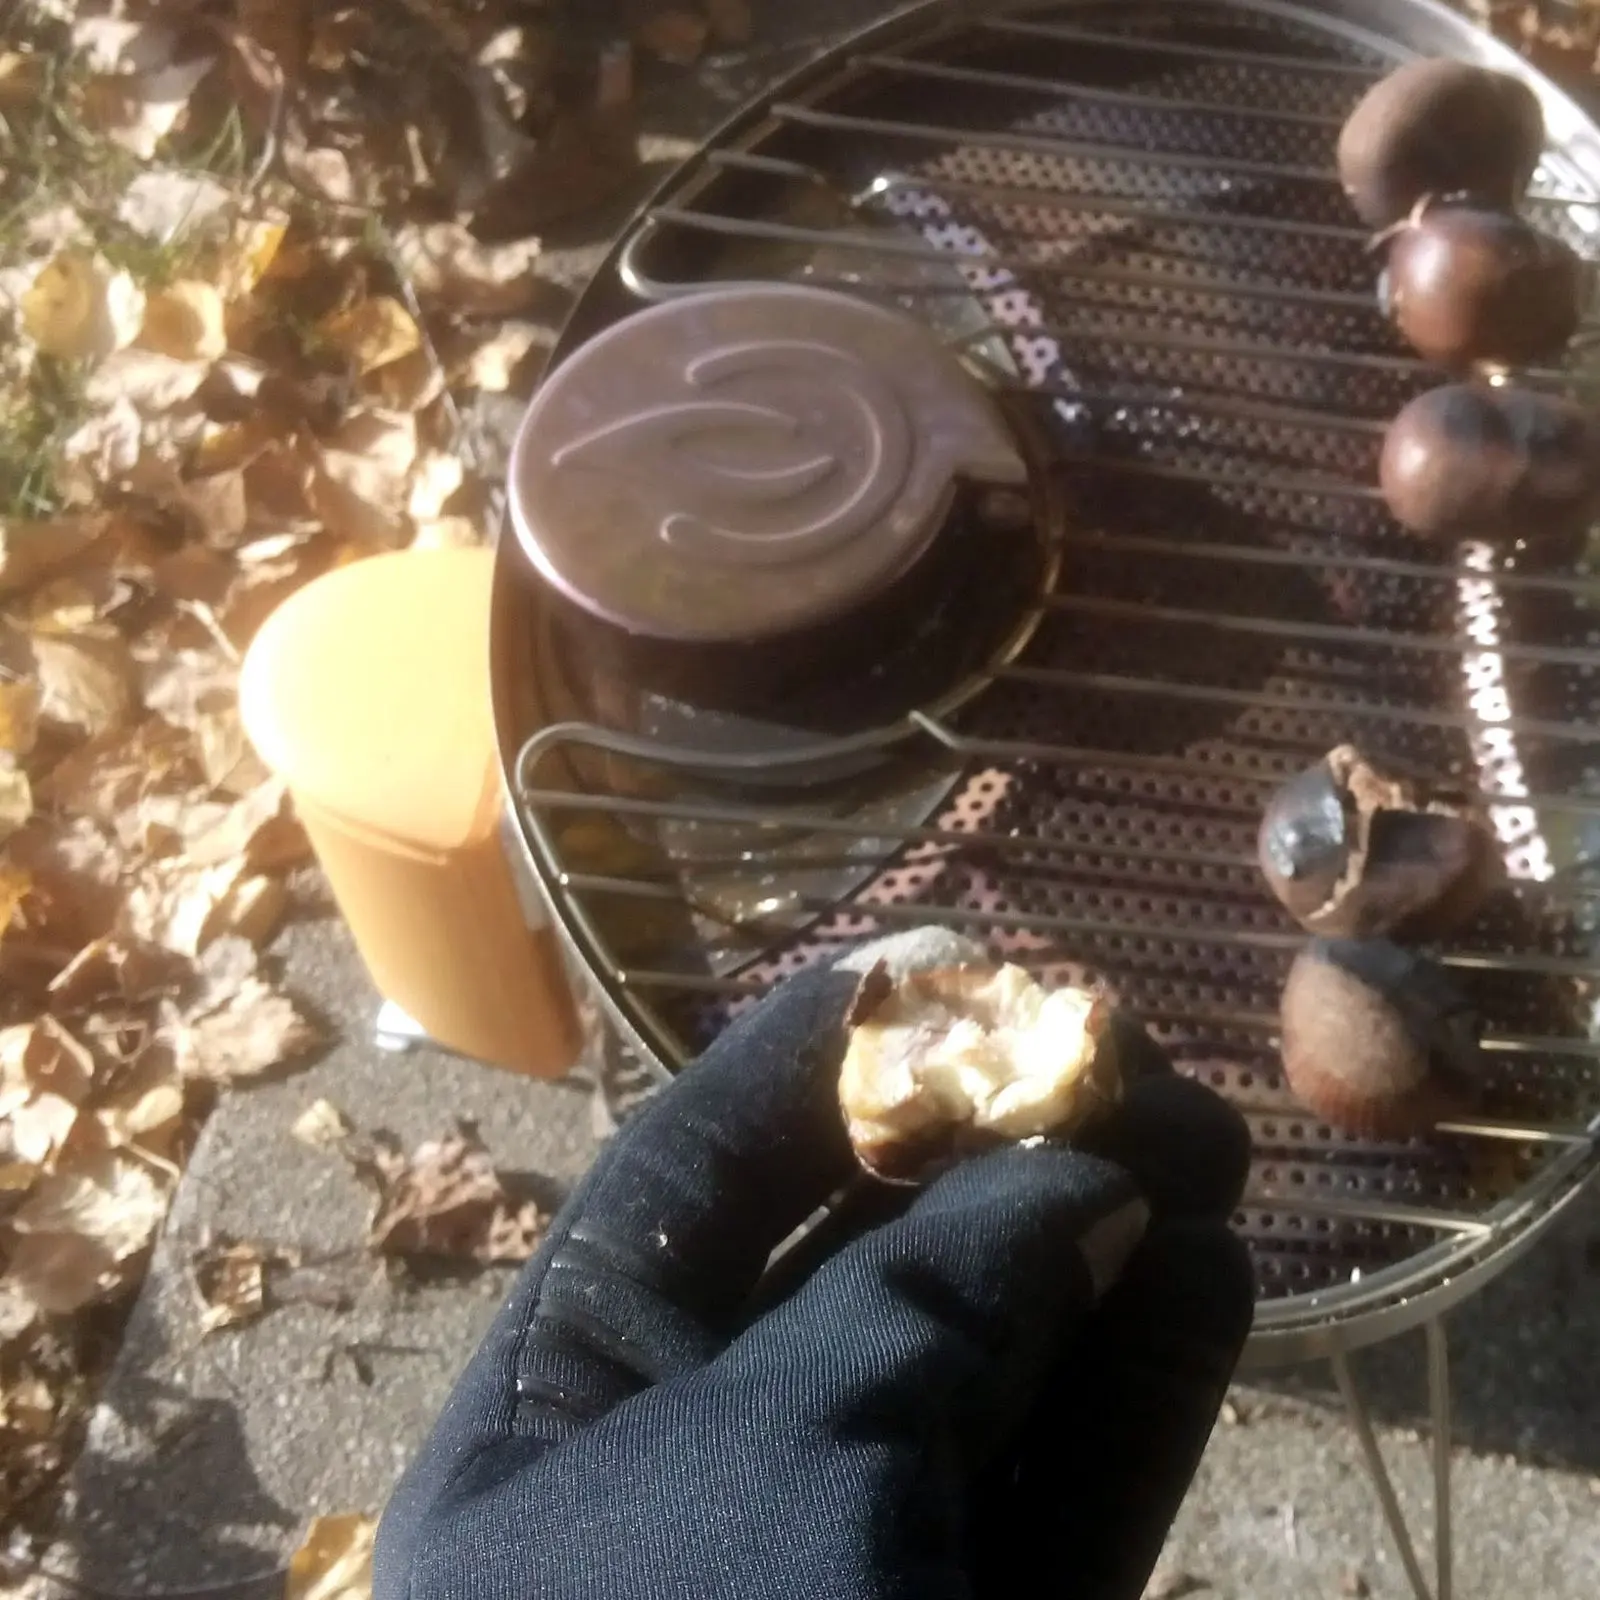 Grilling chestnuts